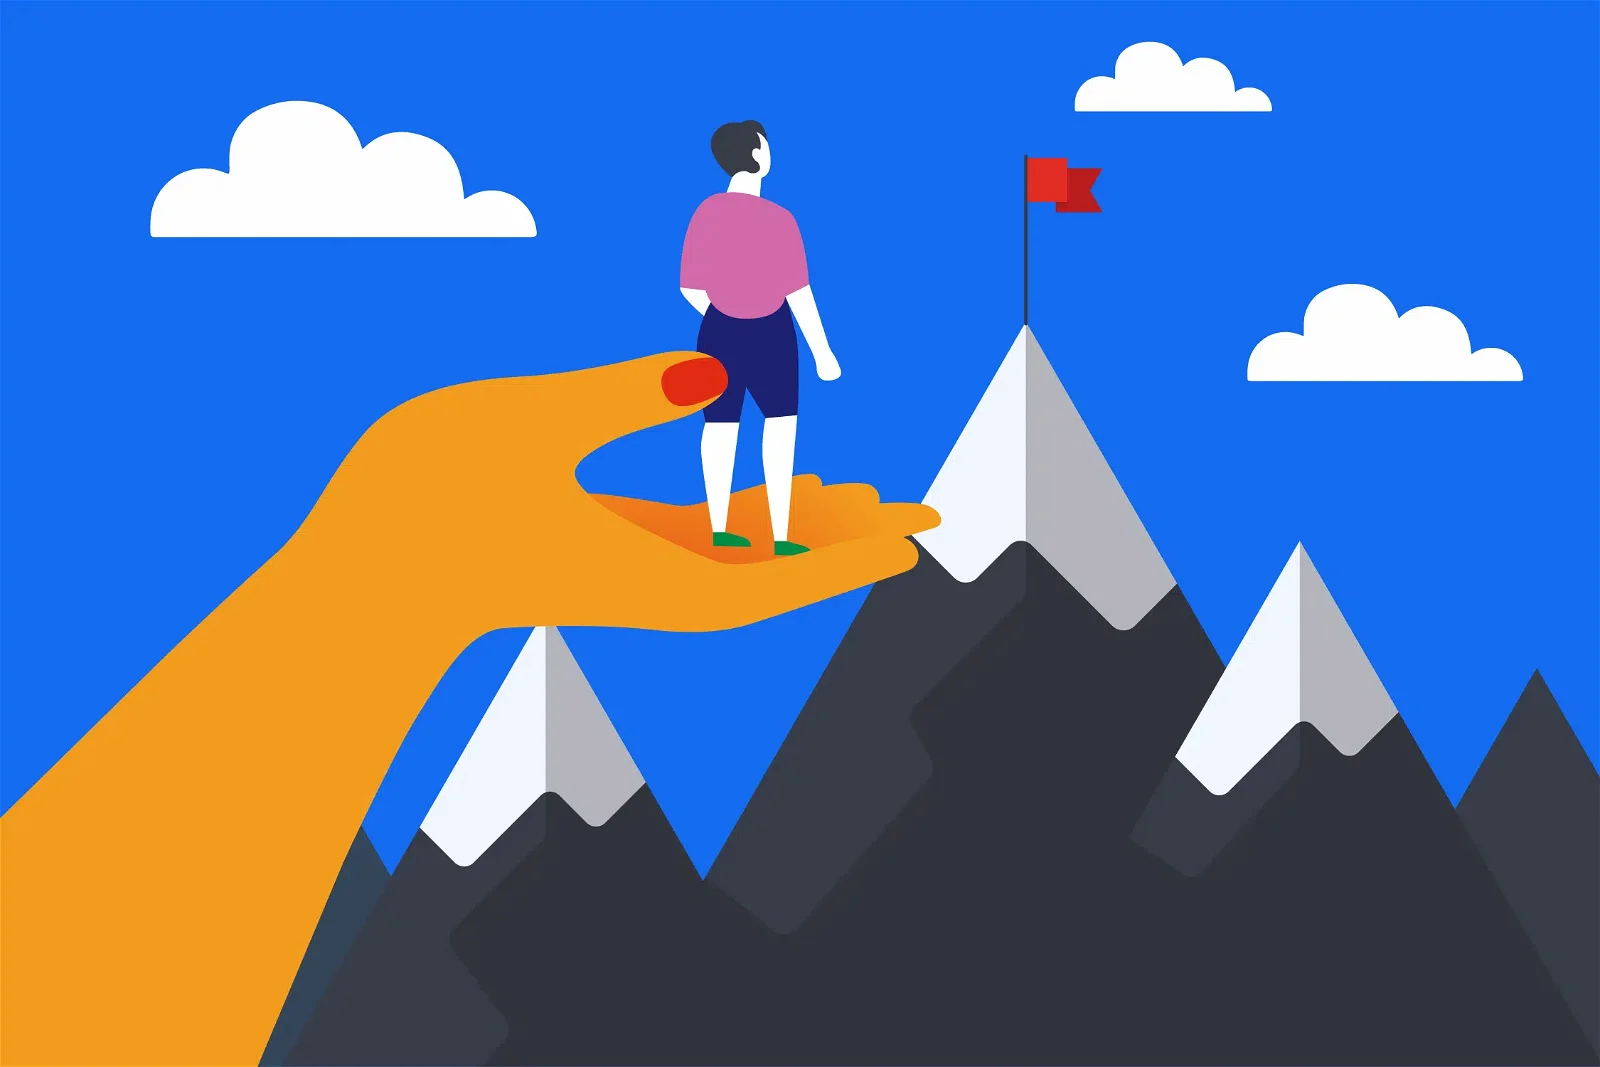 Illustration of a hand holding a person who is looking at mountain peaks with a red flag at the top. White clouds are in the background.